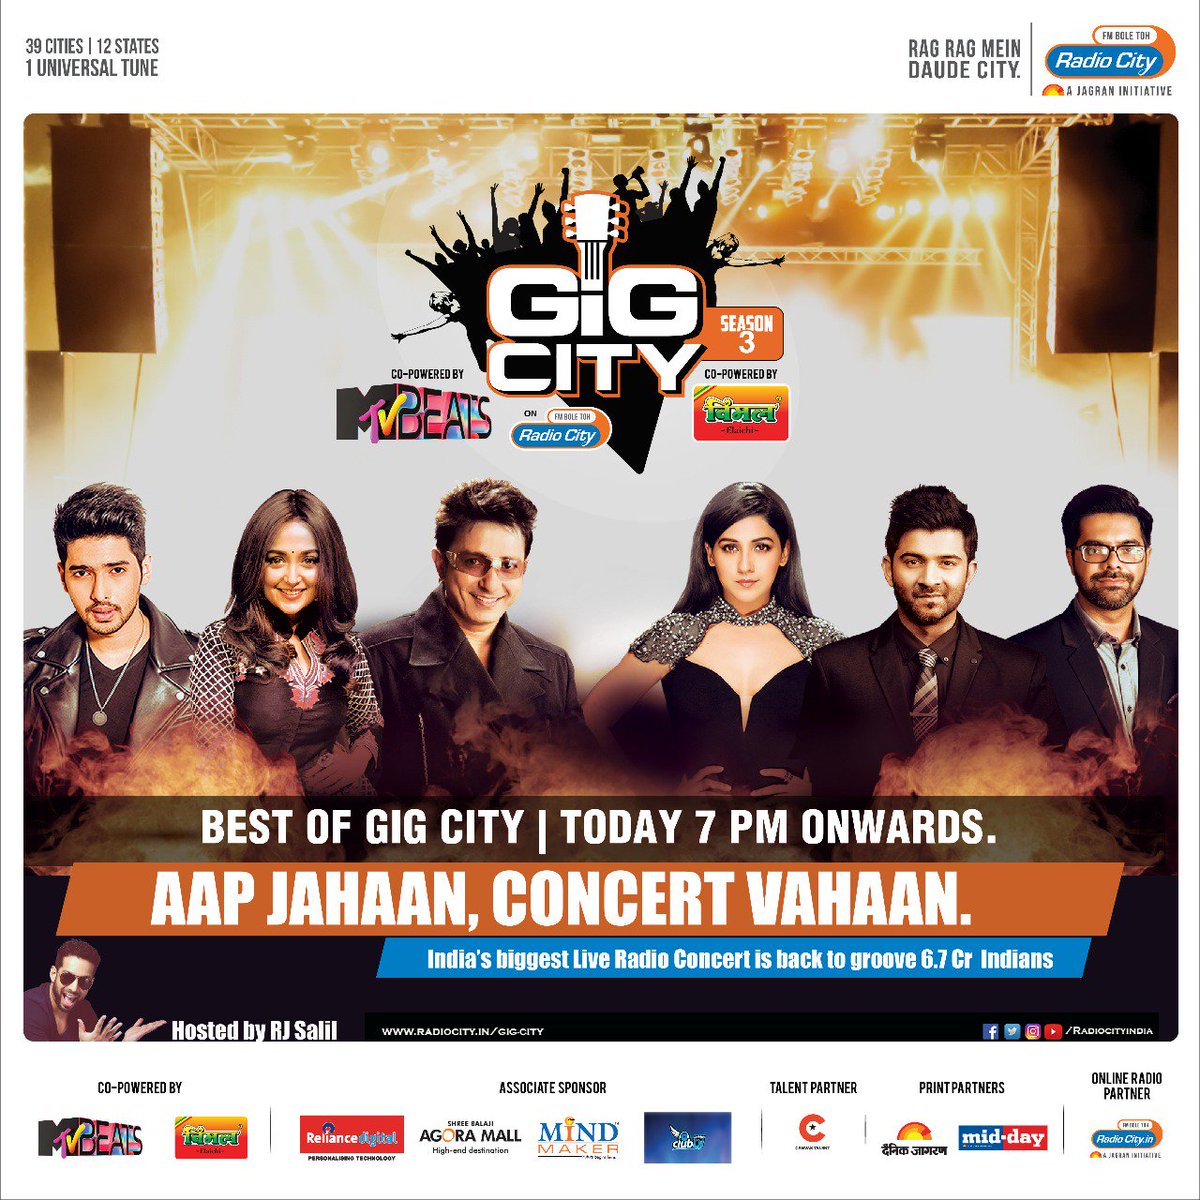 Best of #GigCity3 is here, where some of the handpicked songs for our lovely audience! Can't wait to listen to it. What about you? #GigCity3 @radiocityindia @MTVBeats @canvas_talent @sukhimusic @ArmaanMalik22 @neetimohan18 @JIGARSARAIYA @monalithakur03